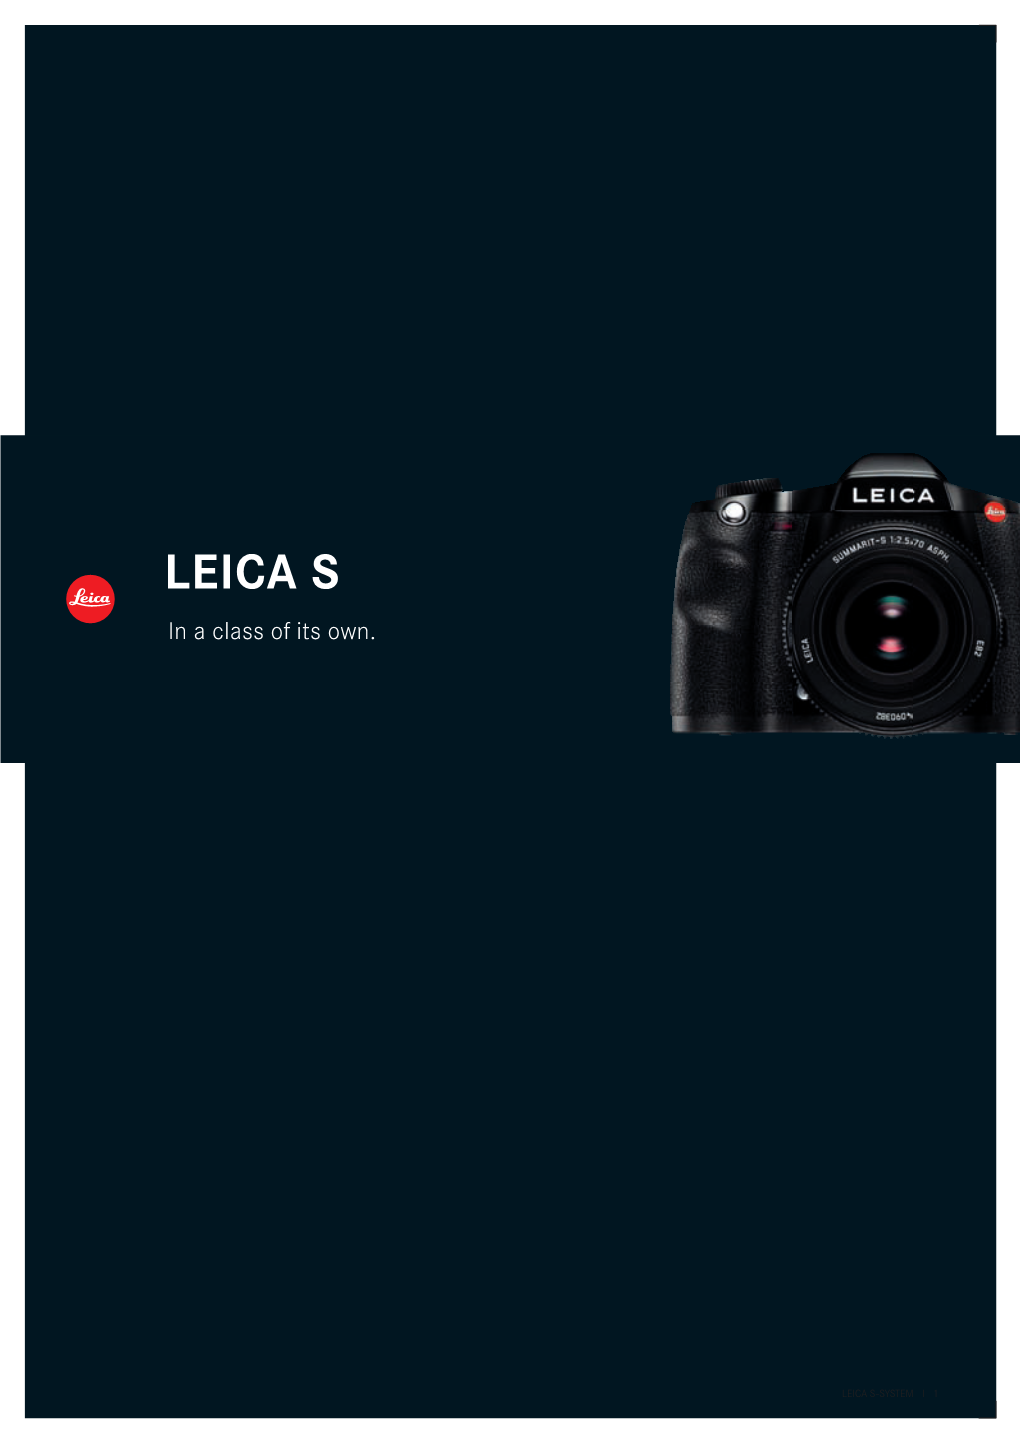 LEICA S in a Class of Its Own